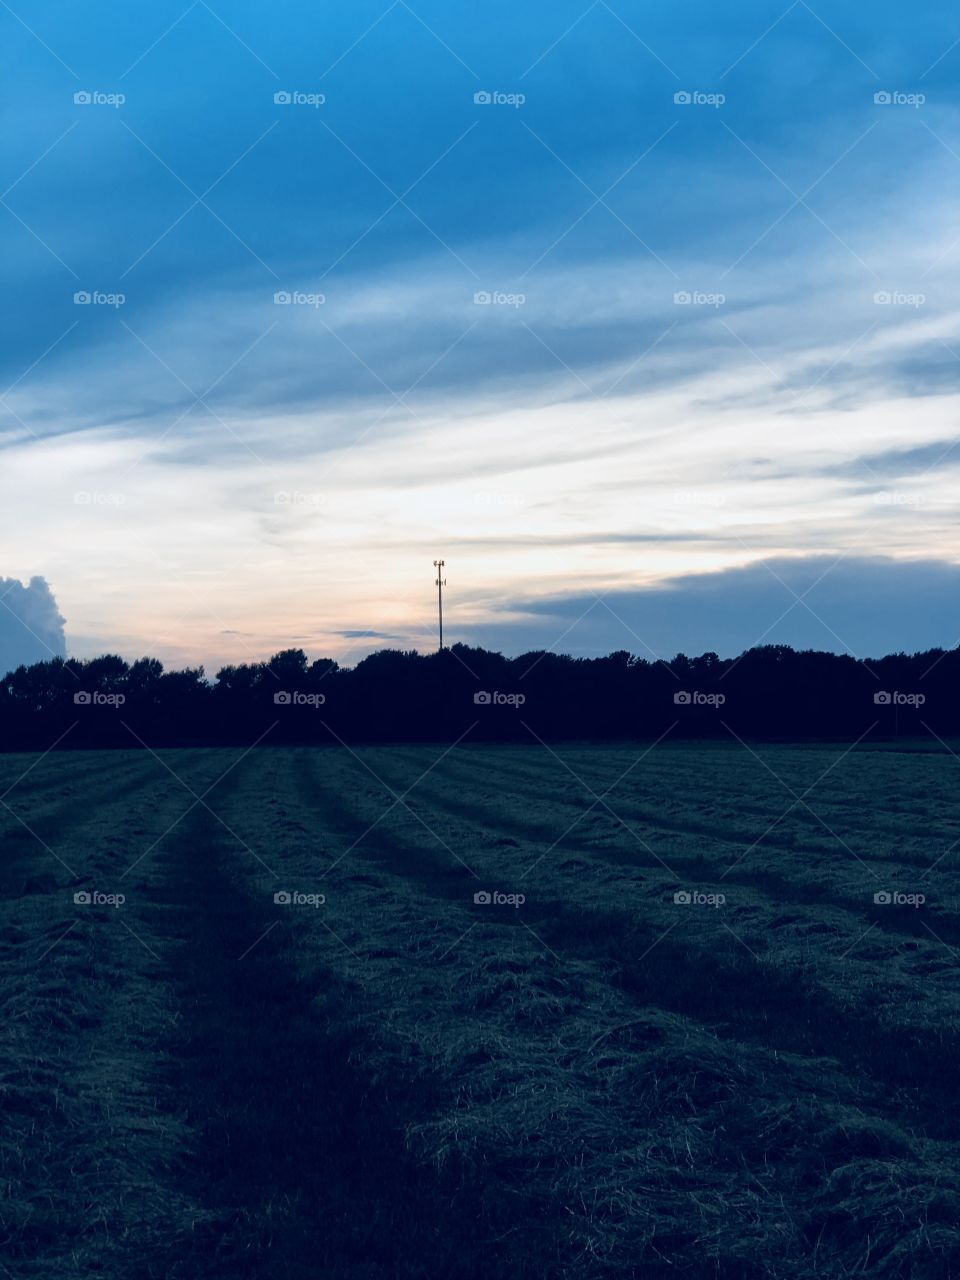 Sunset on a mowed field 